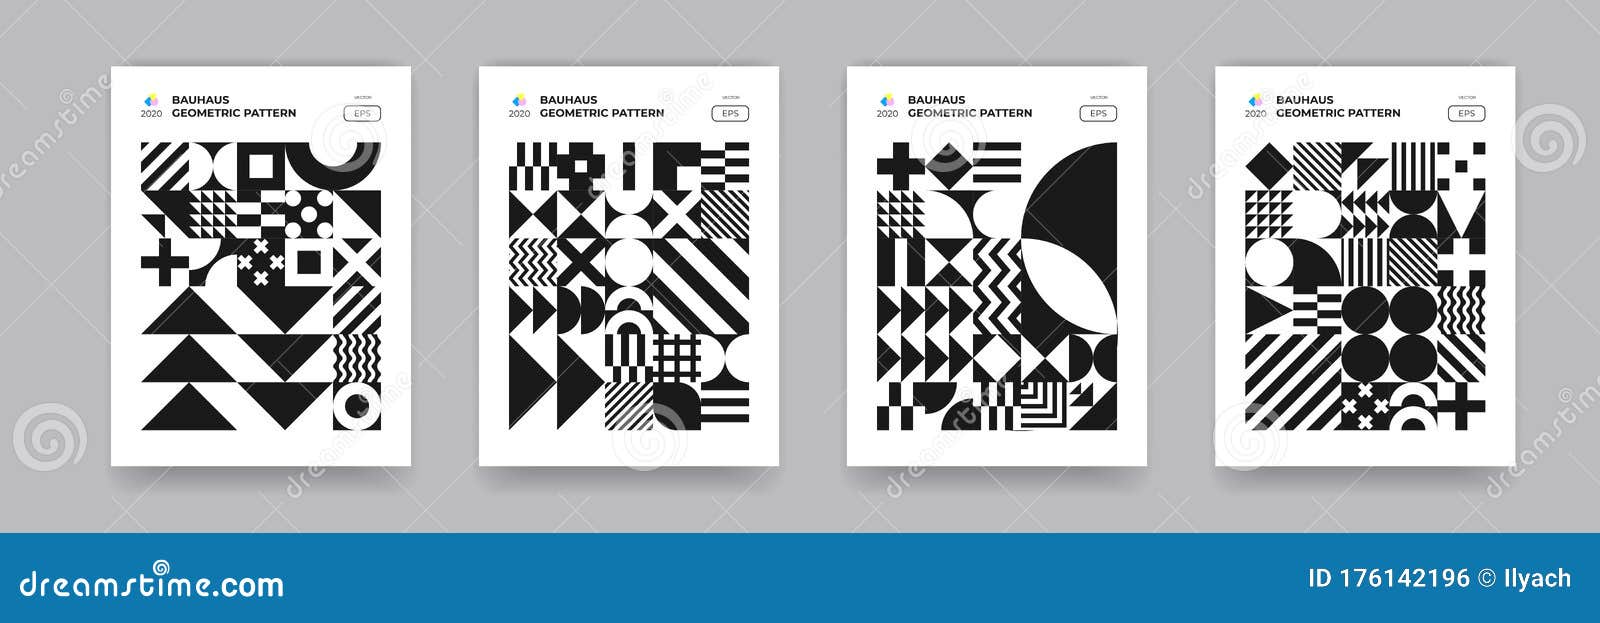 abstract geometric s pattern, bauhaus background. trendy modern circle, triangle and square bauhaus pattern backgrounds,